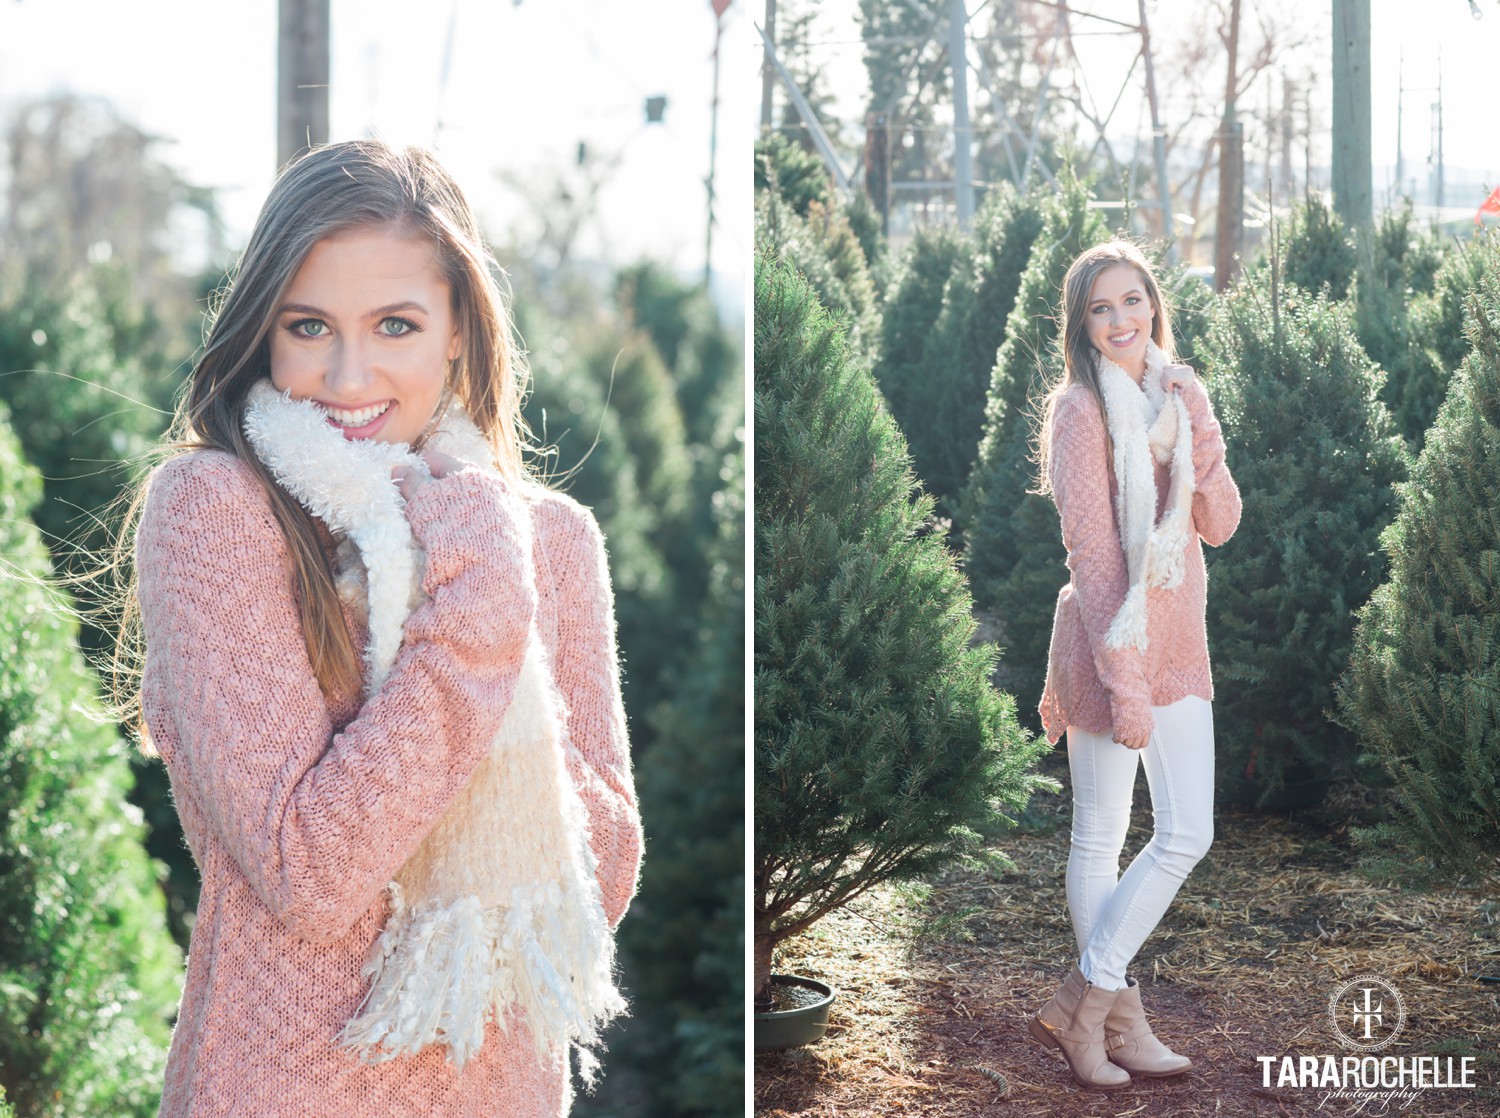 Winter Holiday Senior Pictures in Los Angeles, California by Tara Rochelle Photography